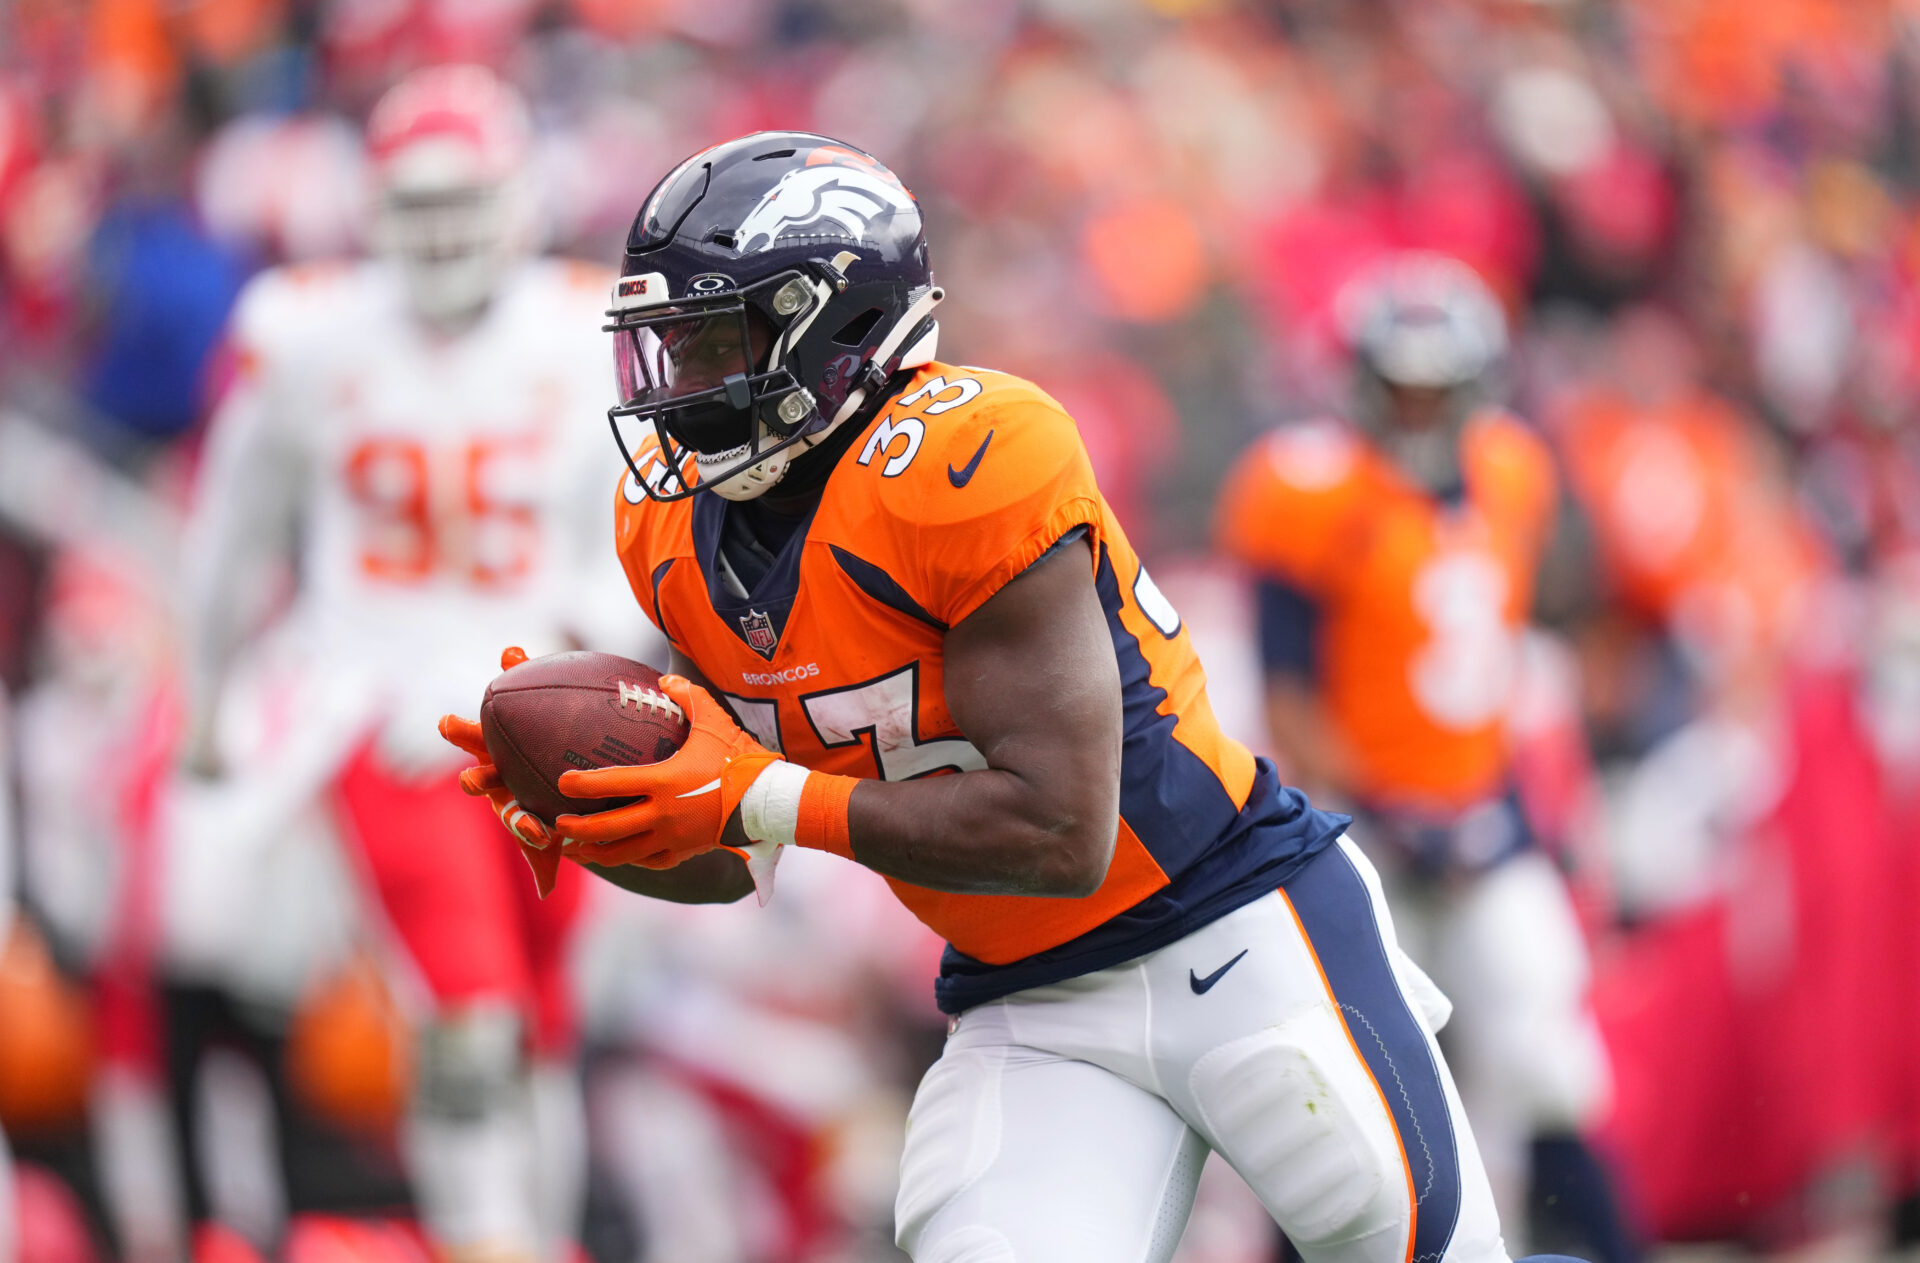 An above-the-knees image of Javonte Williams, in an orange Denver Broncos jersey and white pants, running the football with the rest of the image's background blurry